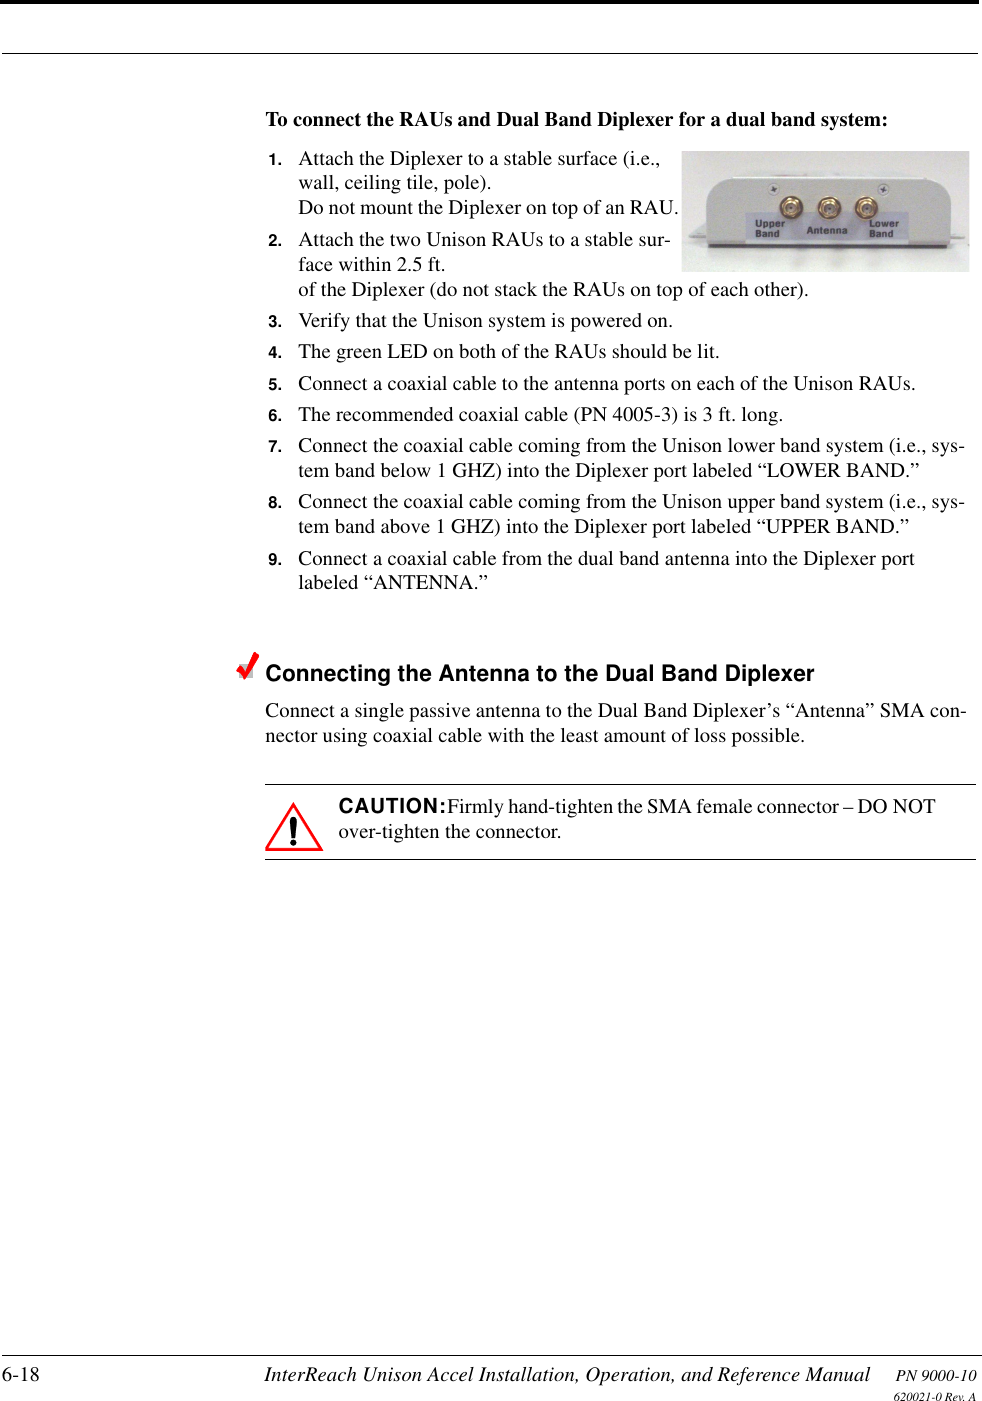 6-18 InterReach Unison Accel Installation, Operation, and Reference Manual PN 9000-10620021-0 Rev. ATo connect the RAUs and Dual Band Diplexer for a dual band system:Connecting the Antenna to the Dual Band DiplexerConnect a single passive antenna to the Dual Band Diplexer’s “Antenna” SMA con-nector using coaxial cable with the least amount of loss possible.CAUTION:Firmly hand-tighten the SMA female connector – DO NOT over-tighten the connector.1. Attach the Diplexer to a stable surface (i.e., wall, ceiling tile, pole).Do not mount the Diplexer on top of an RAU.2. Attach the two Unison RAUs to a stable sur-face within 2.5 ft. of the Diplexer (do not stack the RAUs on top of each other).3. Verify that the Unison system is powered on.4. The green LED on both of the RAUs should be lit.5. Connect a coaxial cable to the antenna ports on each of the Unison RAUs.6. The recommended coaxial cable (PN 4005-3) is 3 ft. long.7. Connect the coaxial cable coming from the Unison lower band system (i.e., sys-tem band below 1 GHZ) into the Diplexer port labeled “LOWER BAND.”8. Connect the coaxial cable coming from the Unison upper band system (i.e., sys-tem band above 1 GHZ) into the Diplexer port labeled “UPPER BAND.”9. Connect a coaxial cable from the dual band antenna into the Diplexer port labeled “ANTENNA.”